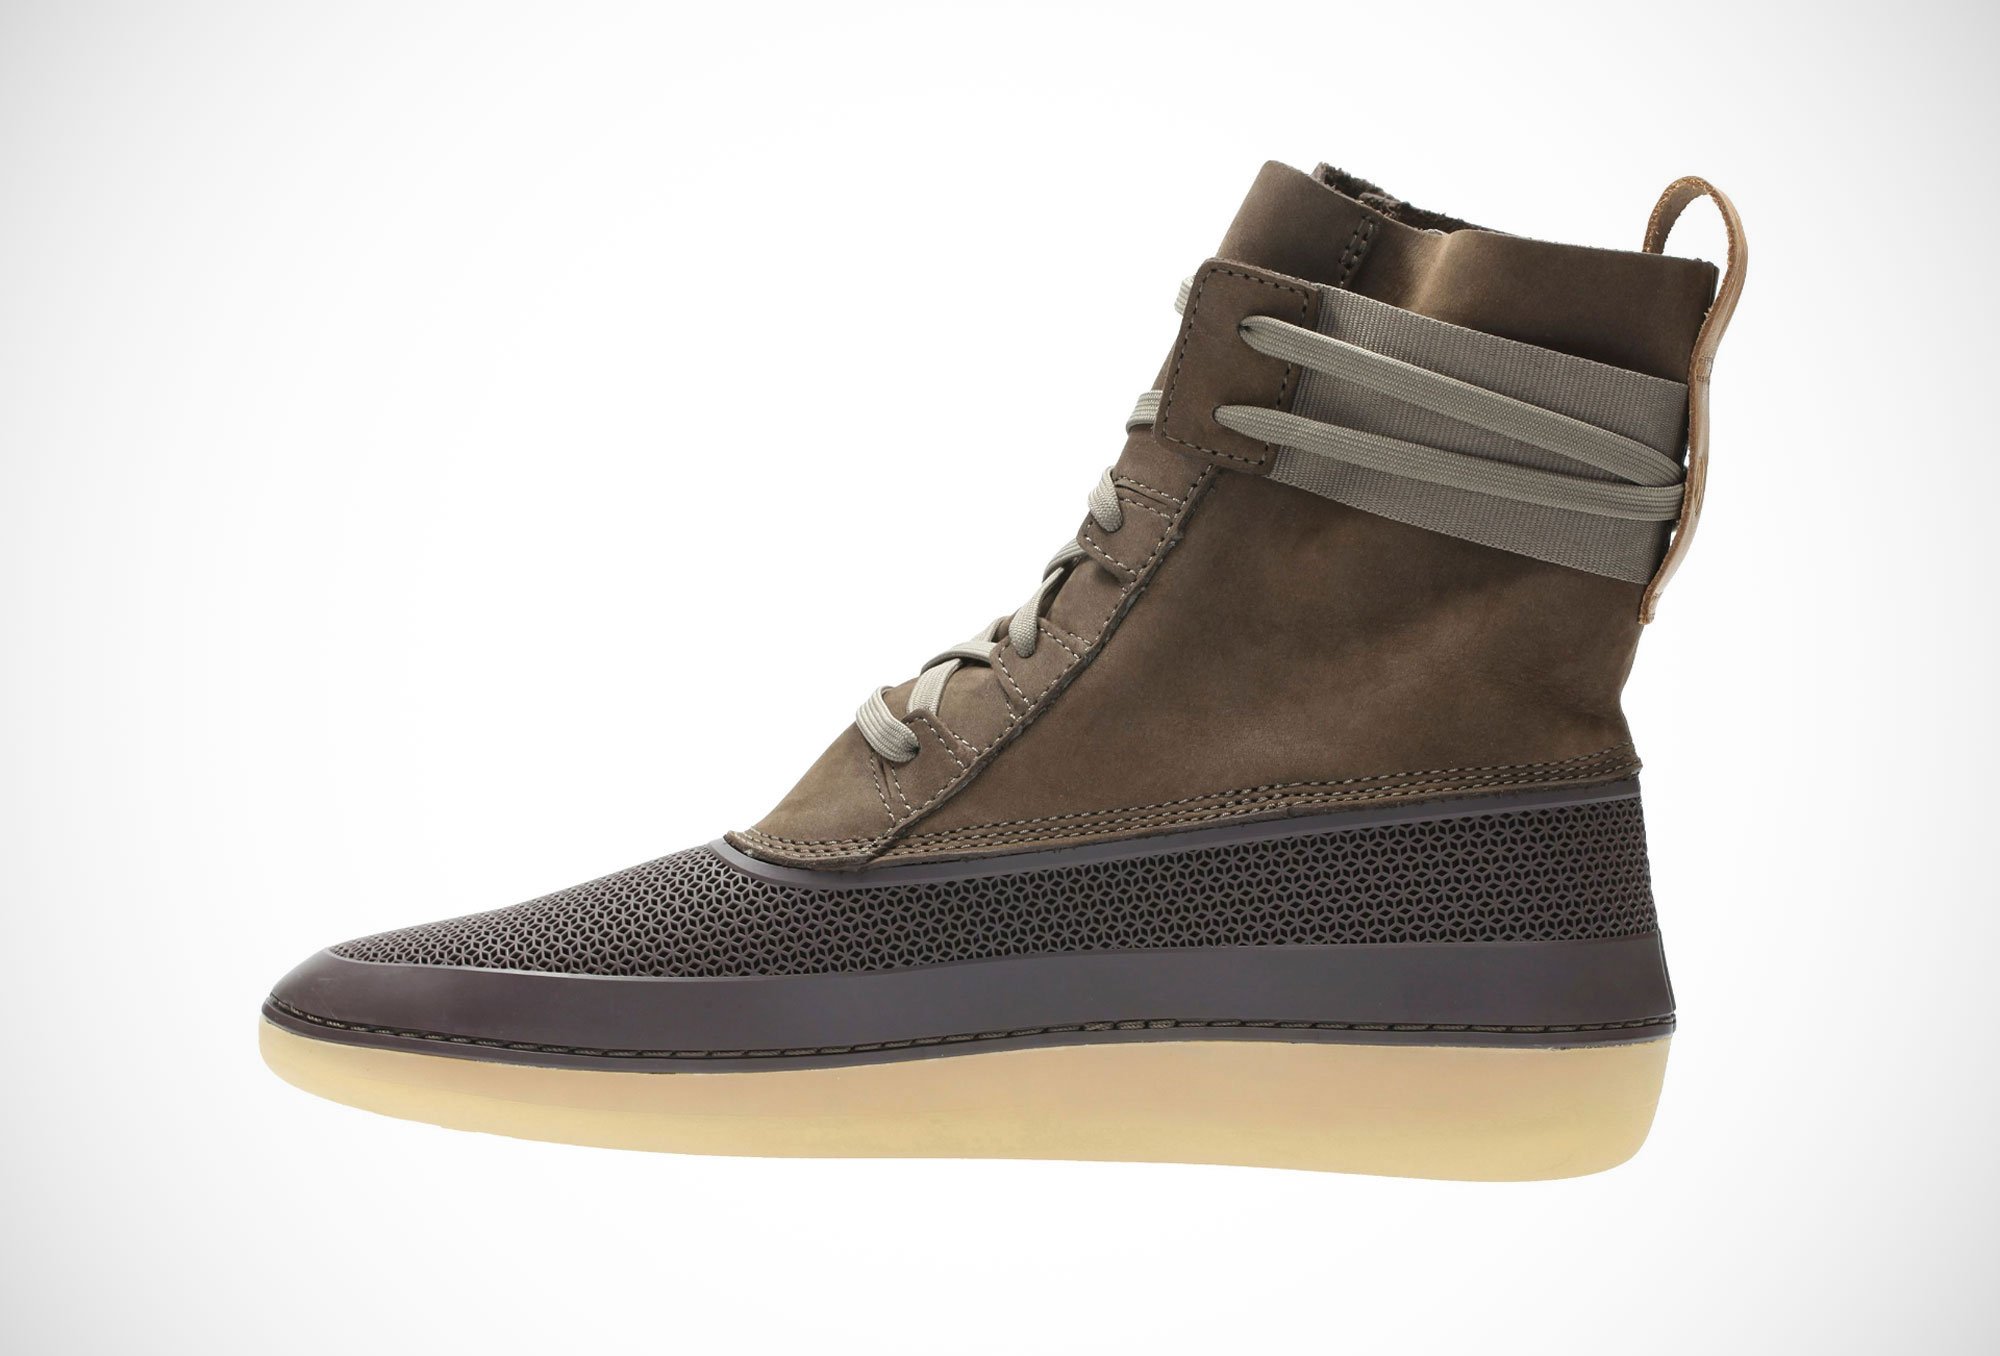 The Nature V Boot - A Sporty Alternative To The Clarks Desert Boots